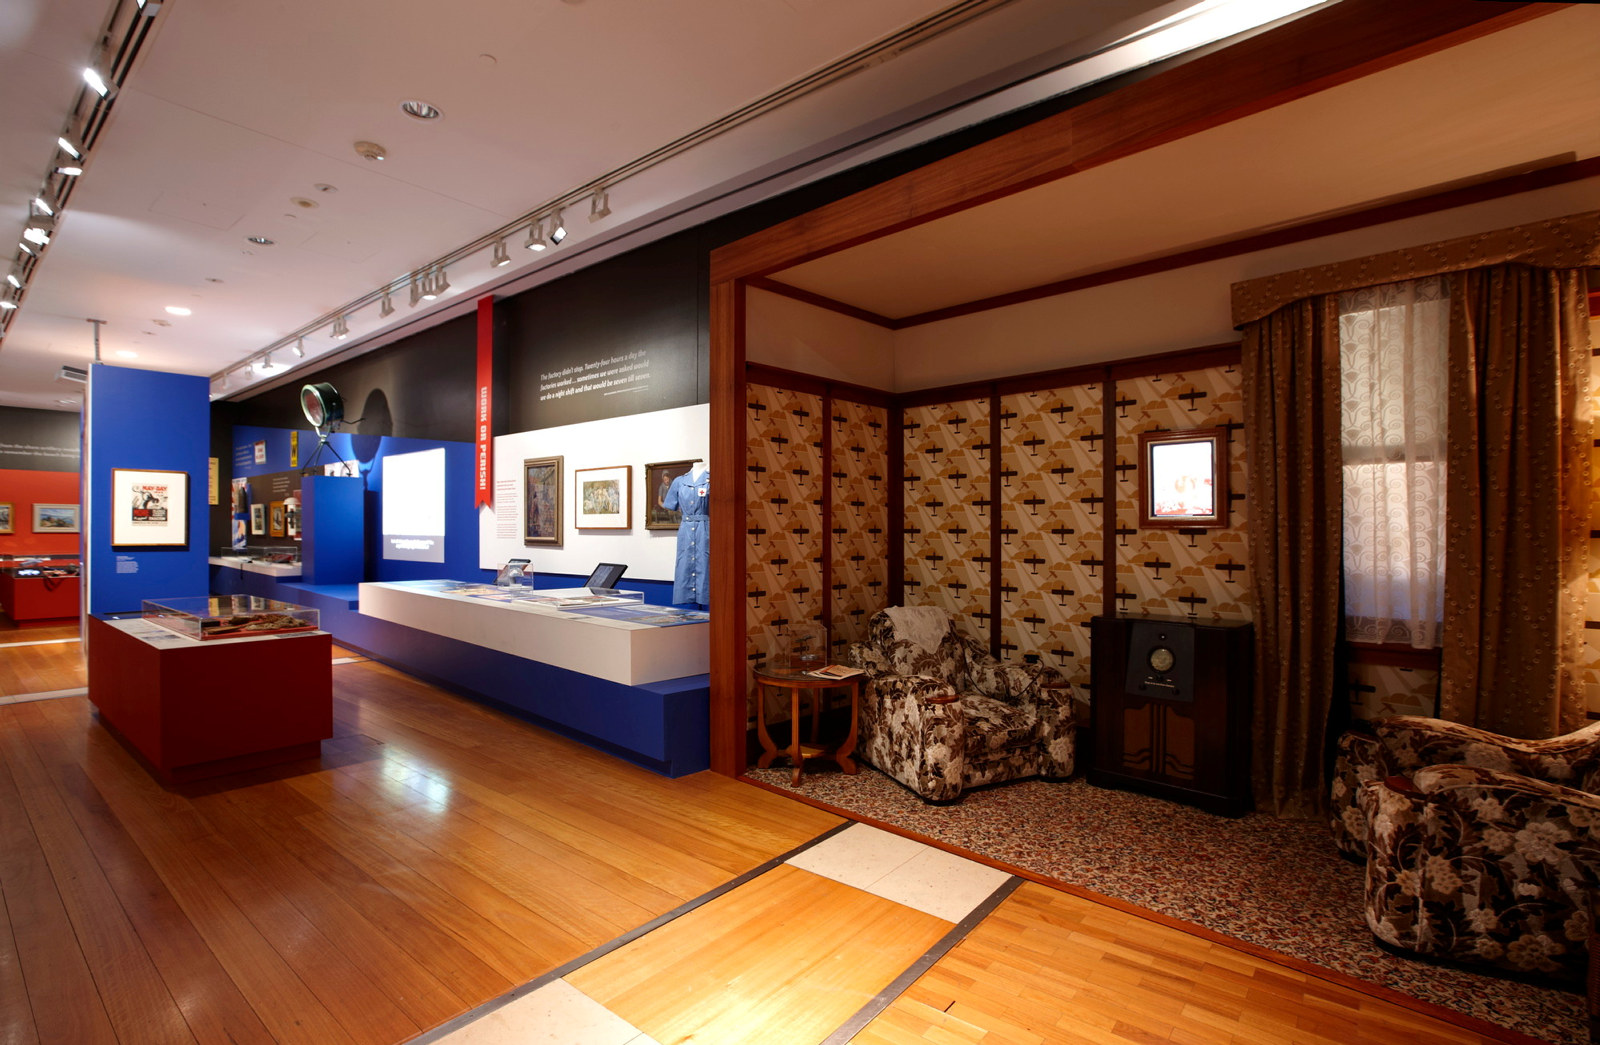 Home front: wartime Sydney 1939-45 installation view